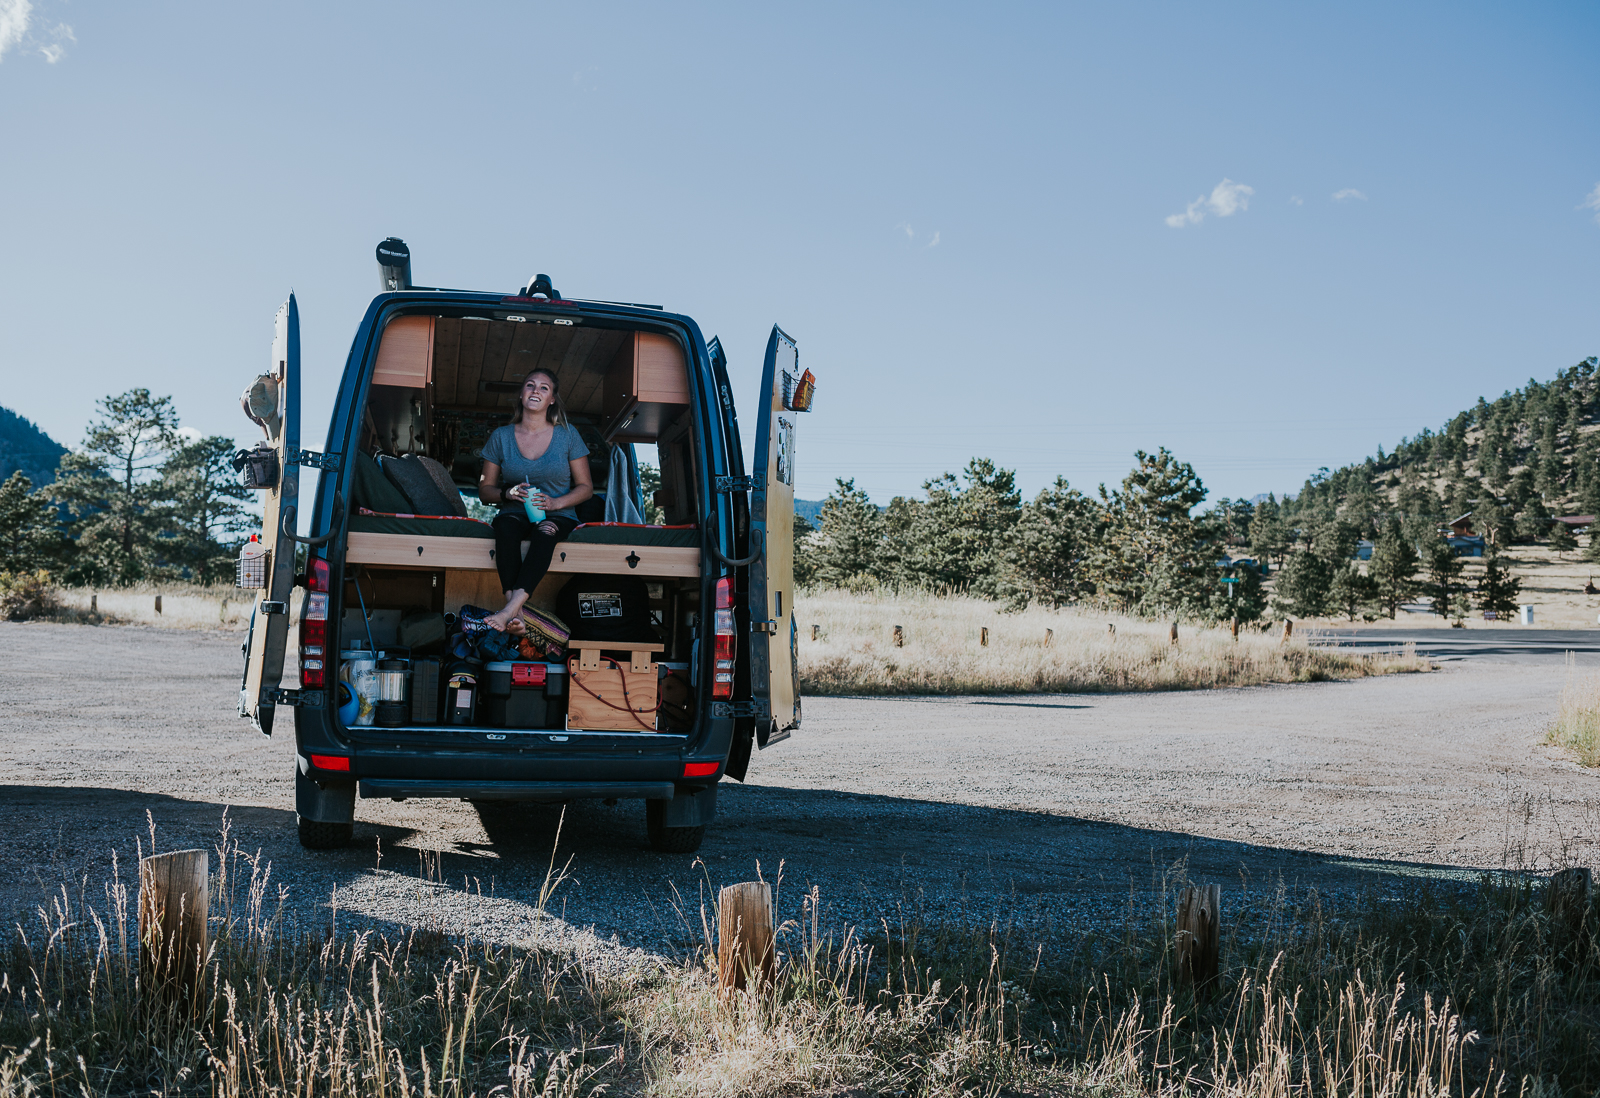 The Best Boondocking States for Campers + Vanlifers